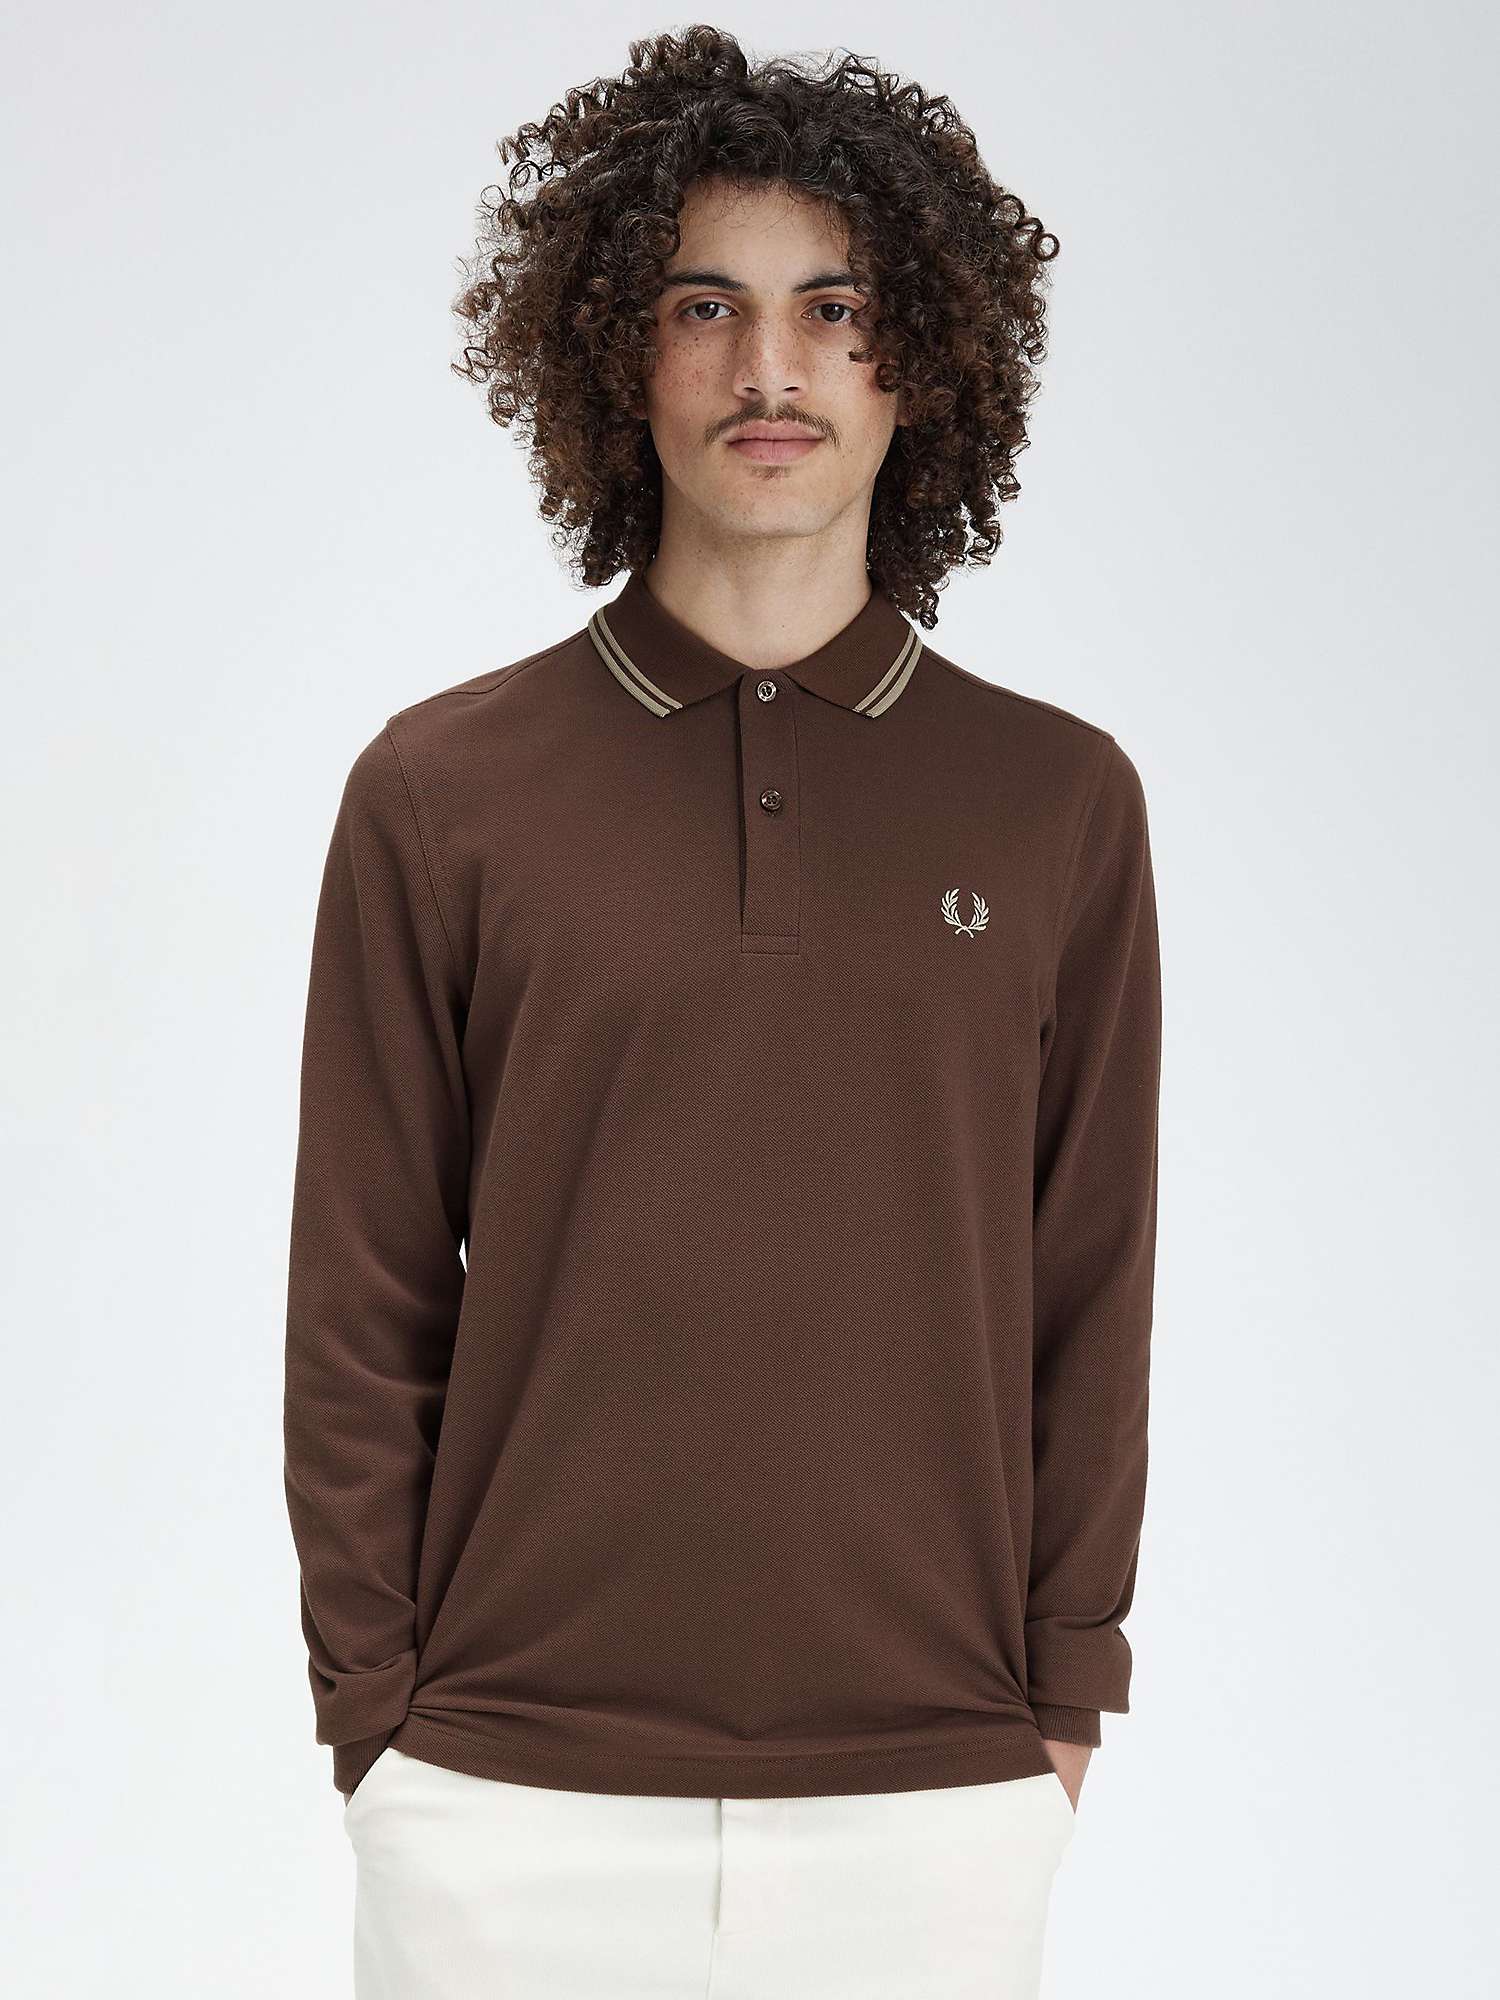 Buy Fred Perry Twin Tipped Tennis Long Sleeve Polo Shirt, Brick/Warm Grey Online at johnlewis.com